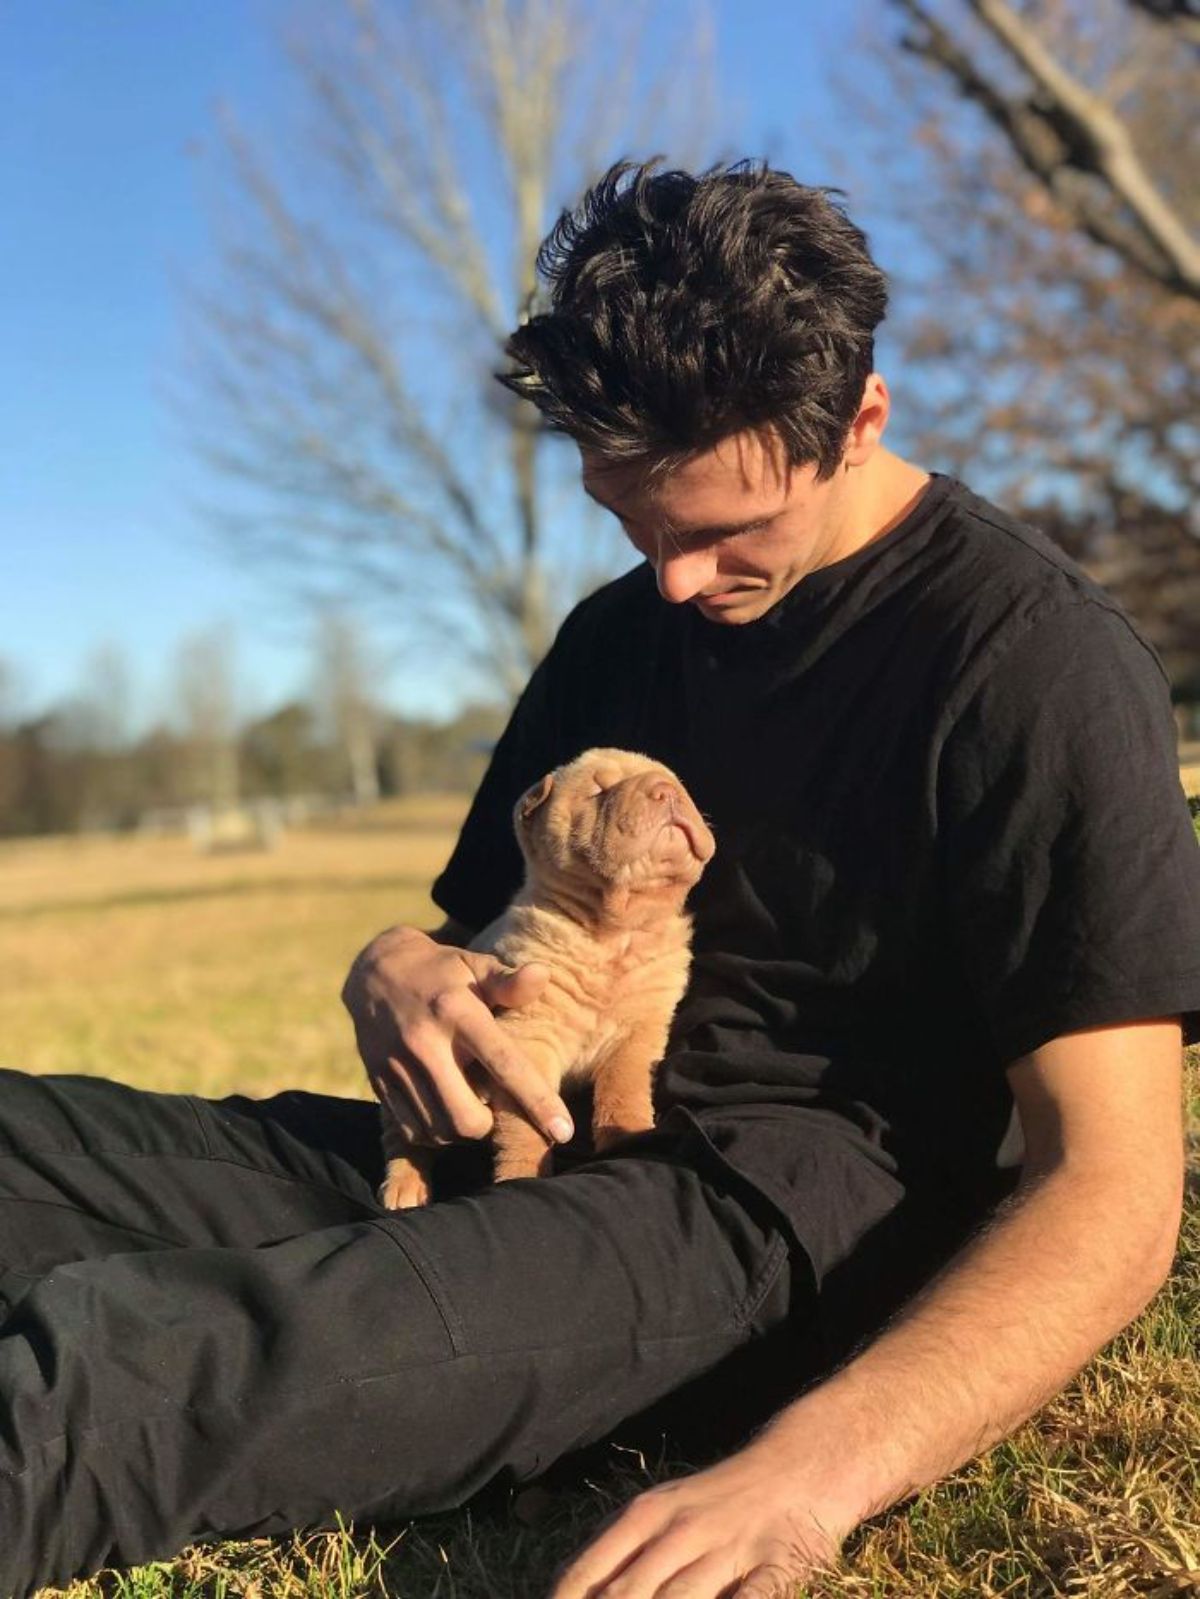 brown shar pei puppy standing on a man's lap and the man is sitting with legs outstretched on grass